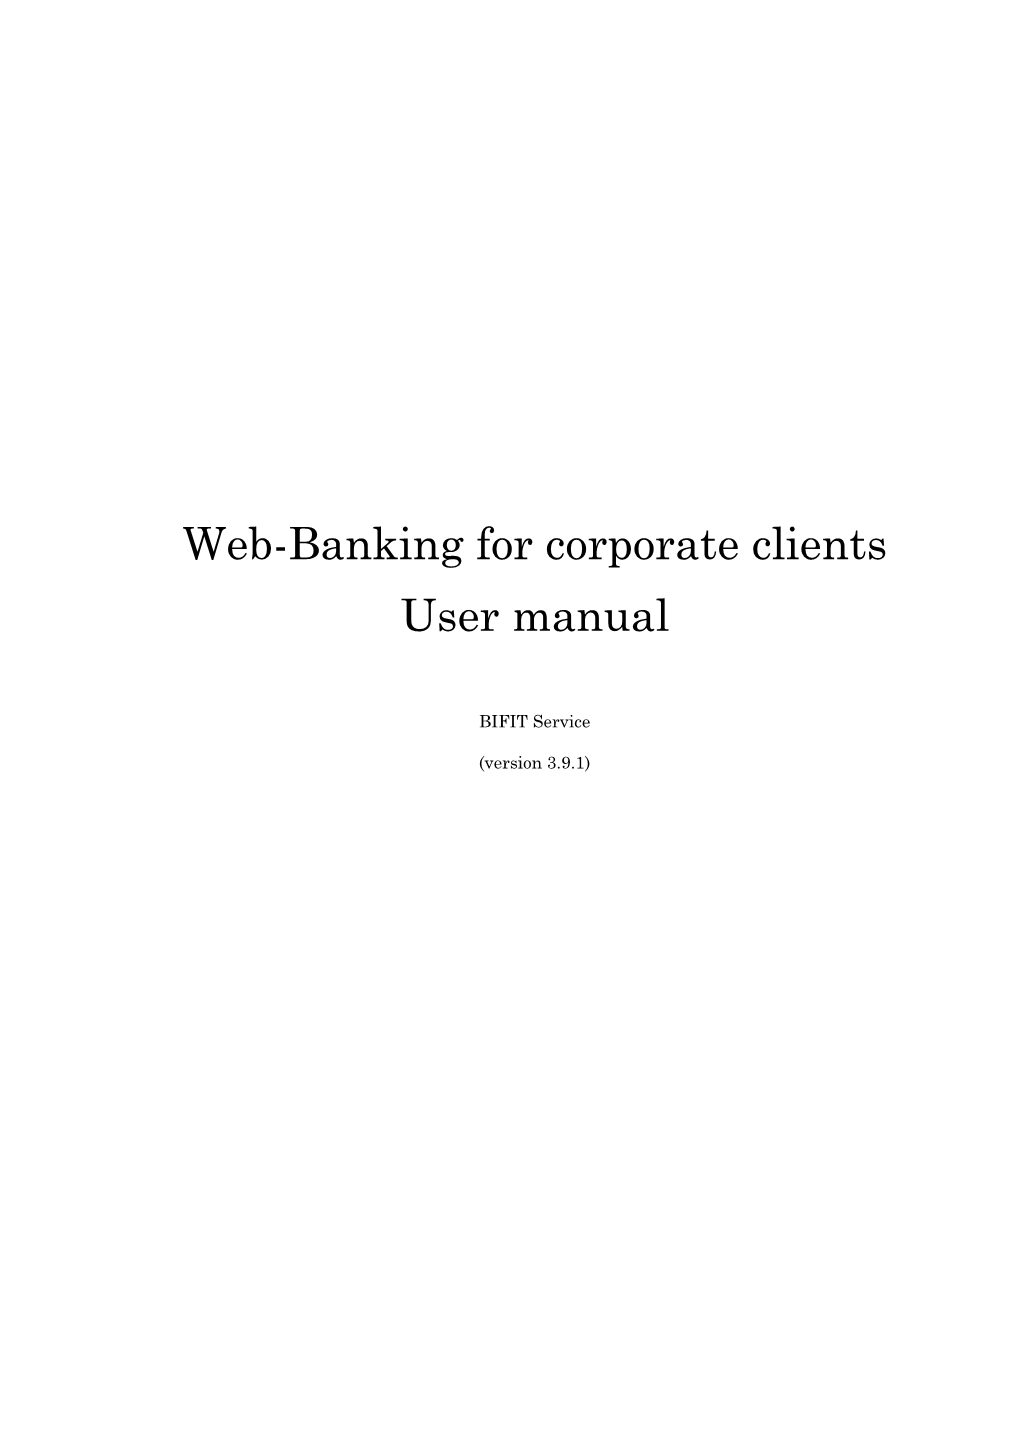 Web-Banking for Corporate Clients User Manual